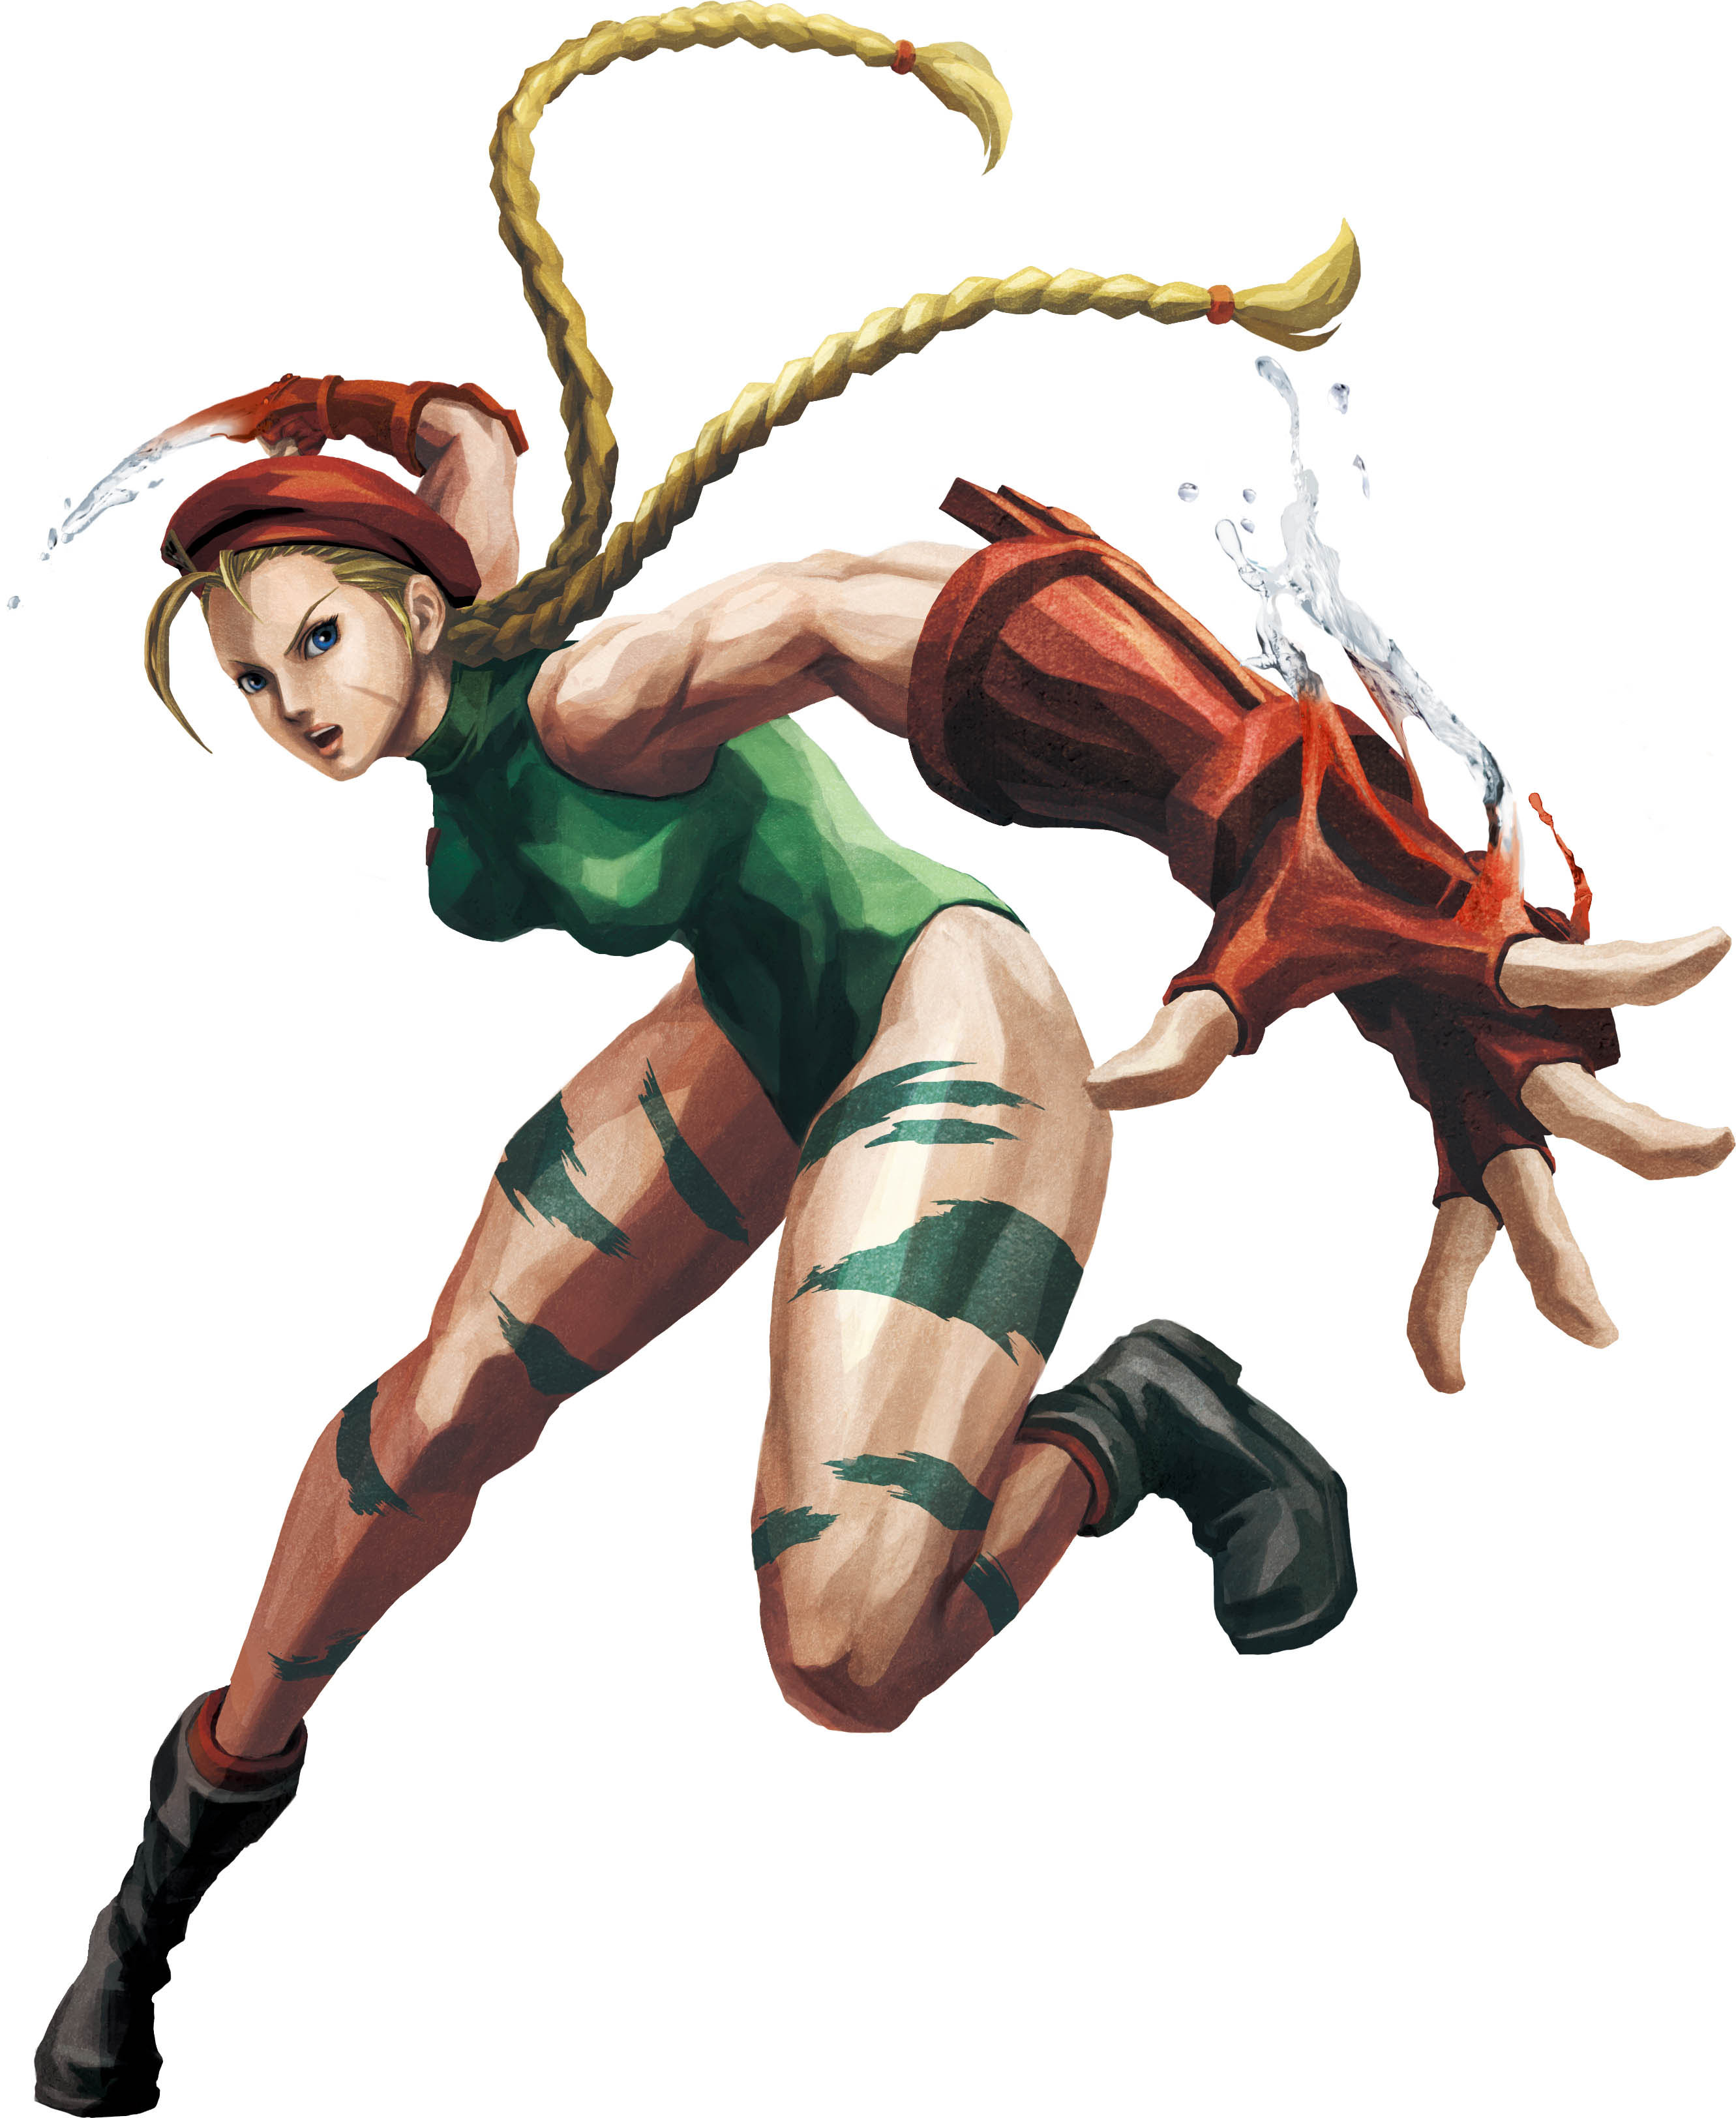 Square Enix Street Fighter 4 IV Cammy (White Limited Color Ver